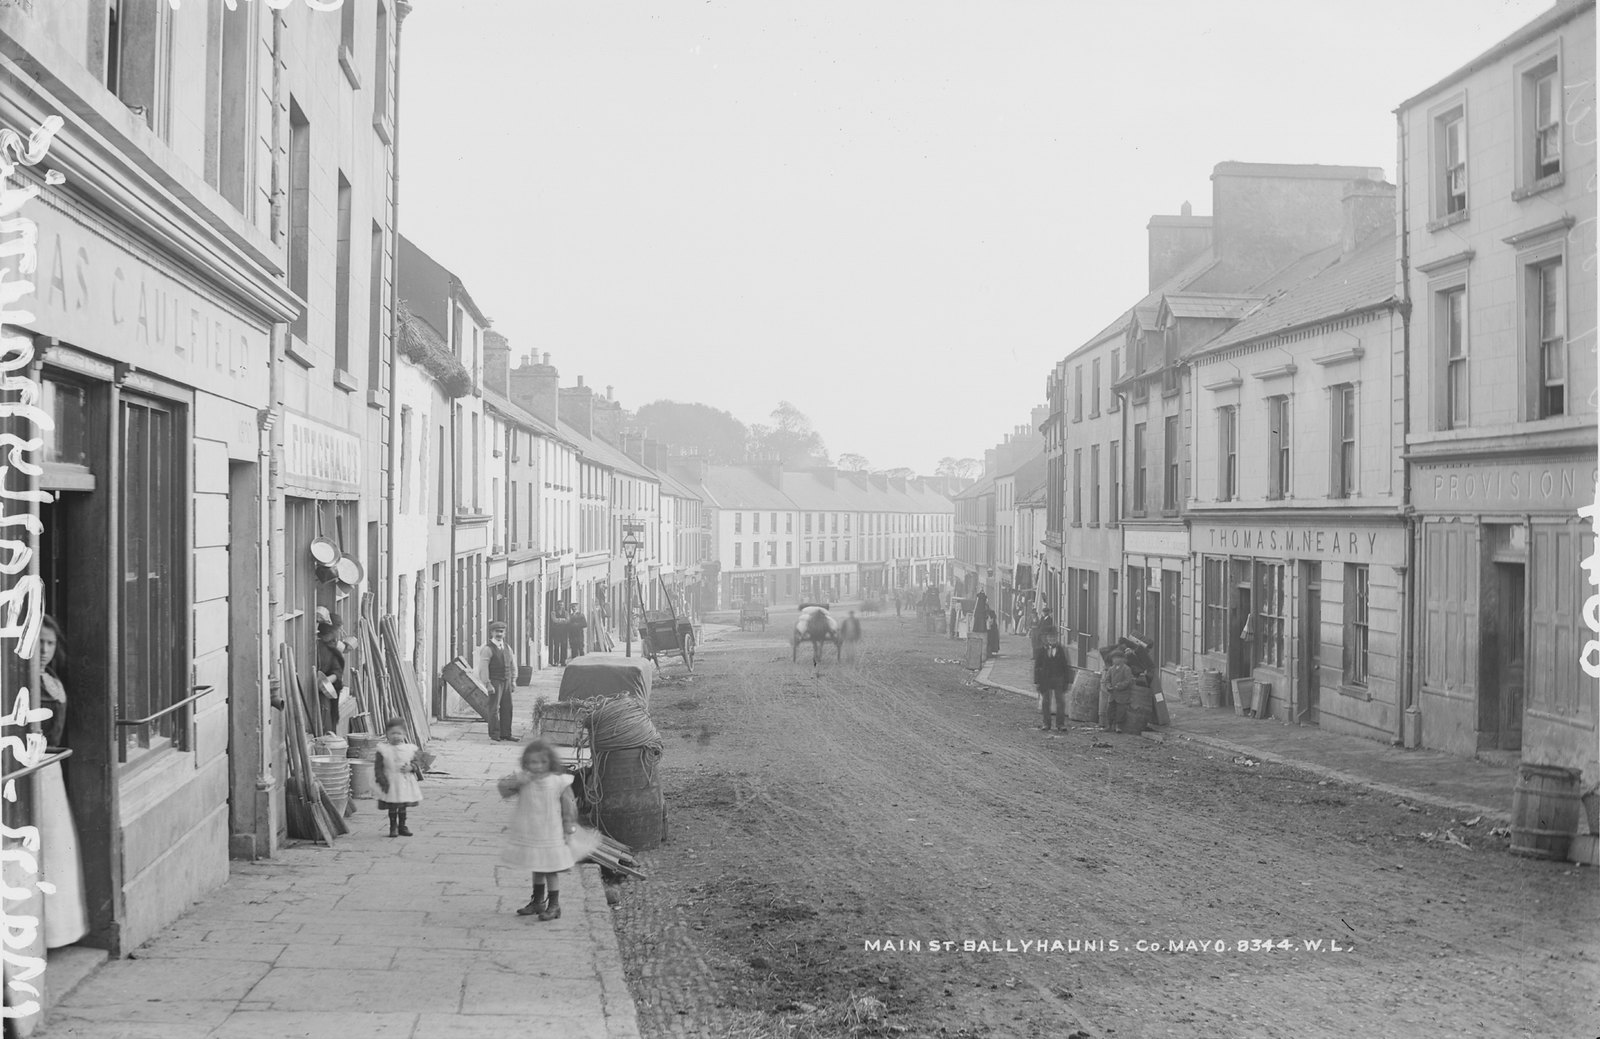 Main Street, Ballyhaunis, Co. Mayo | by National Library of Ireland on The Commons